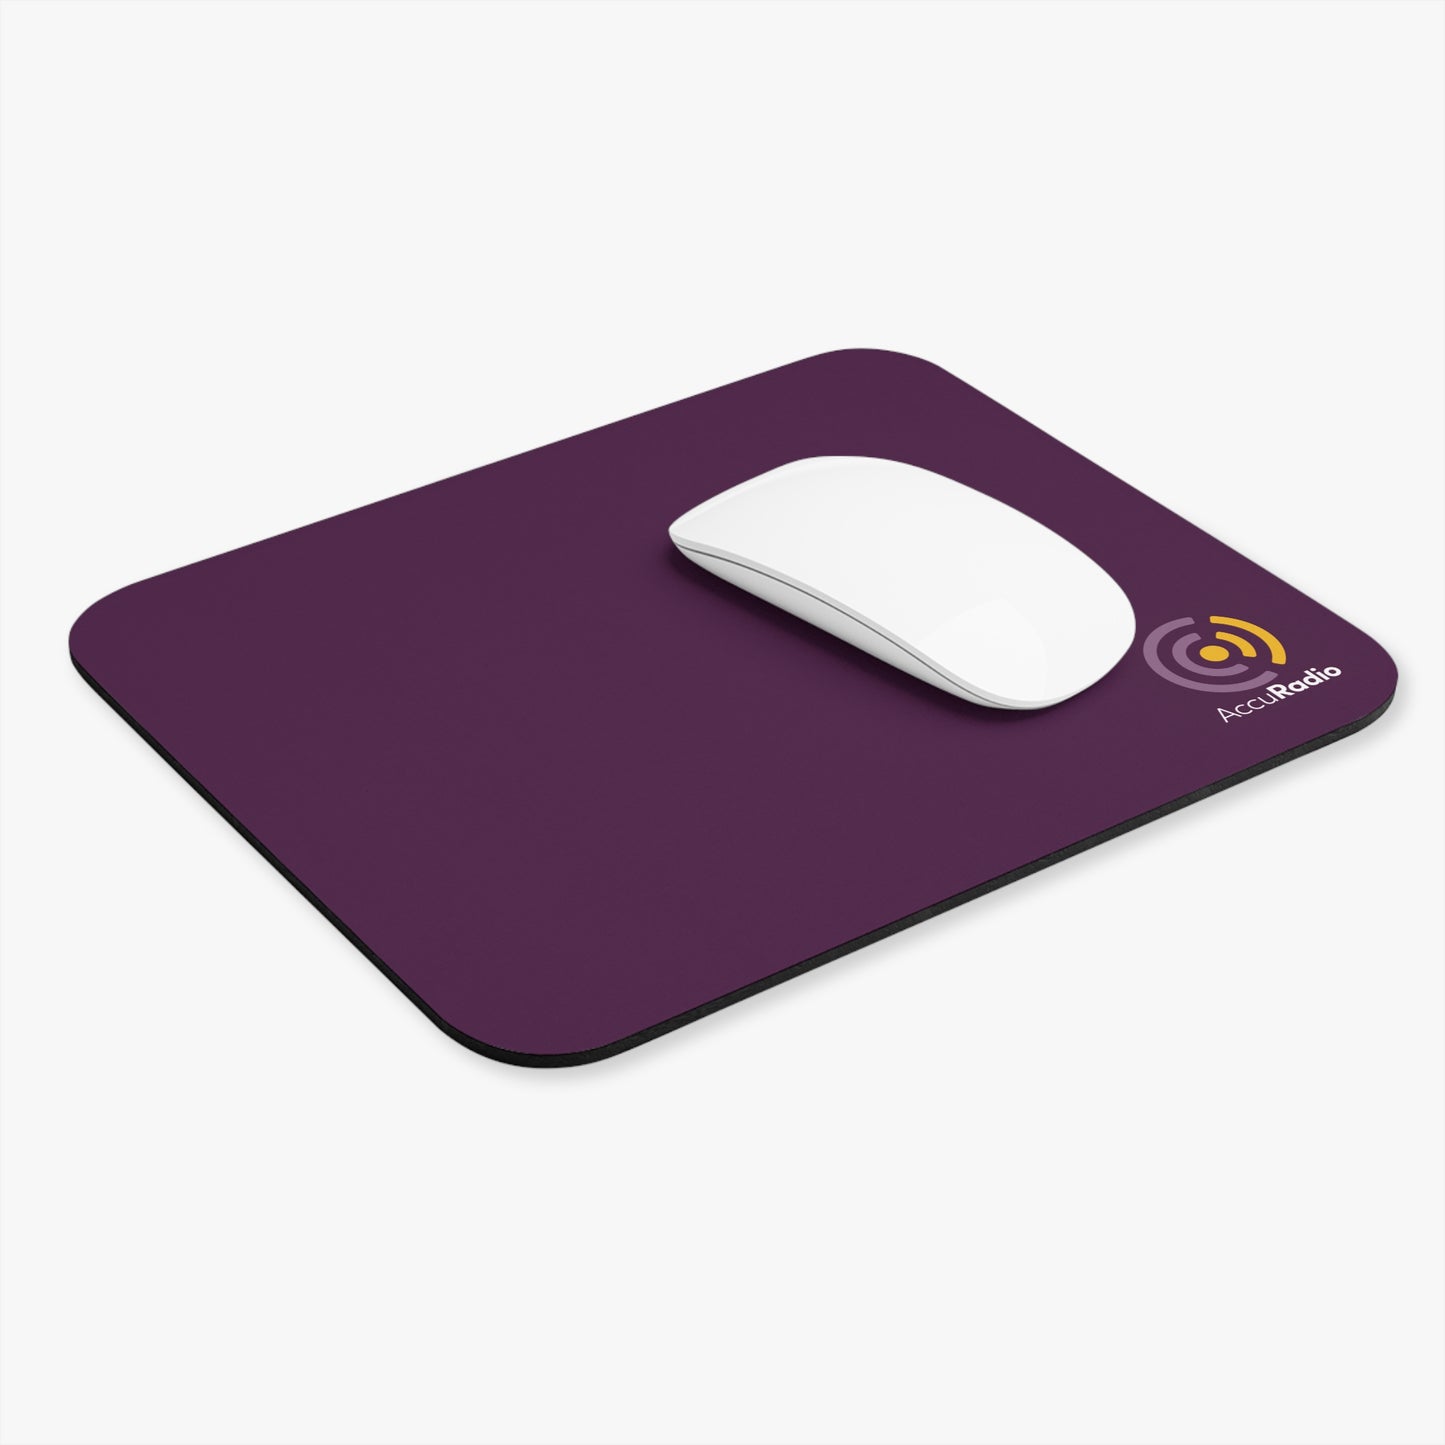 AccuRadio mouse pad